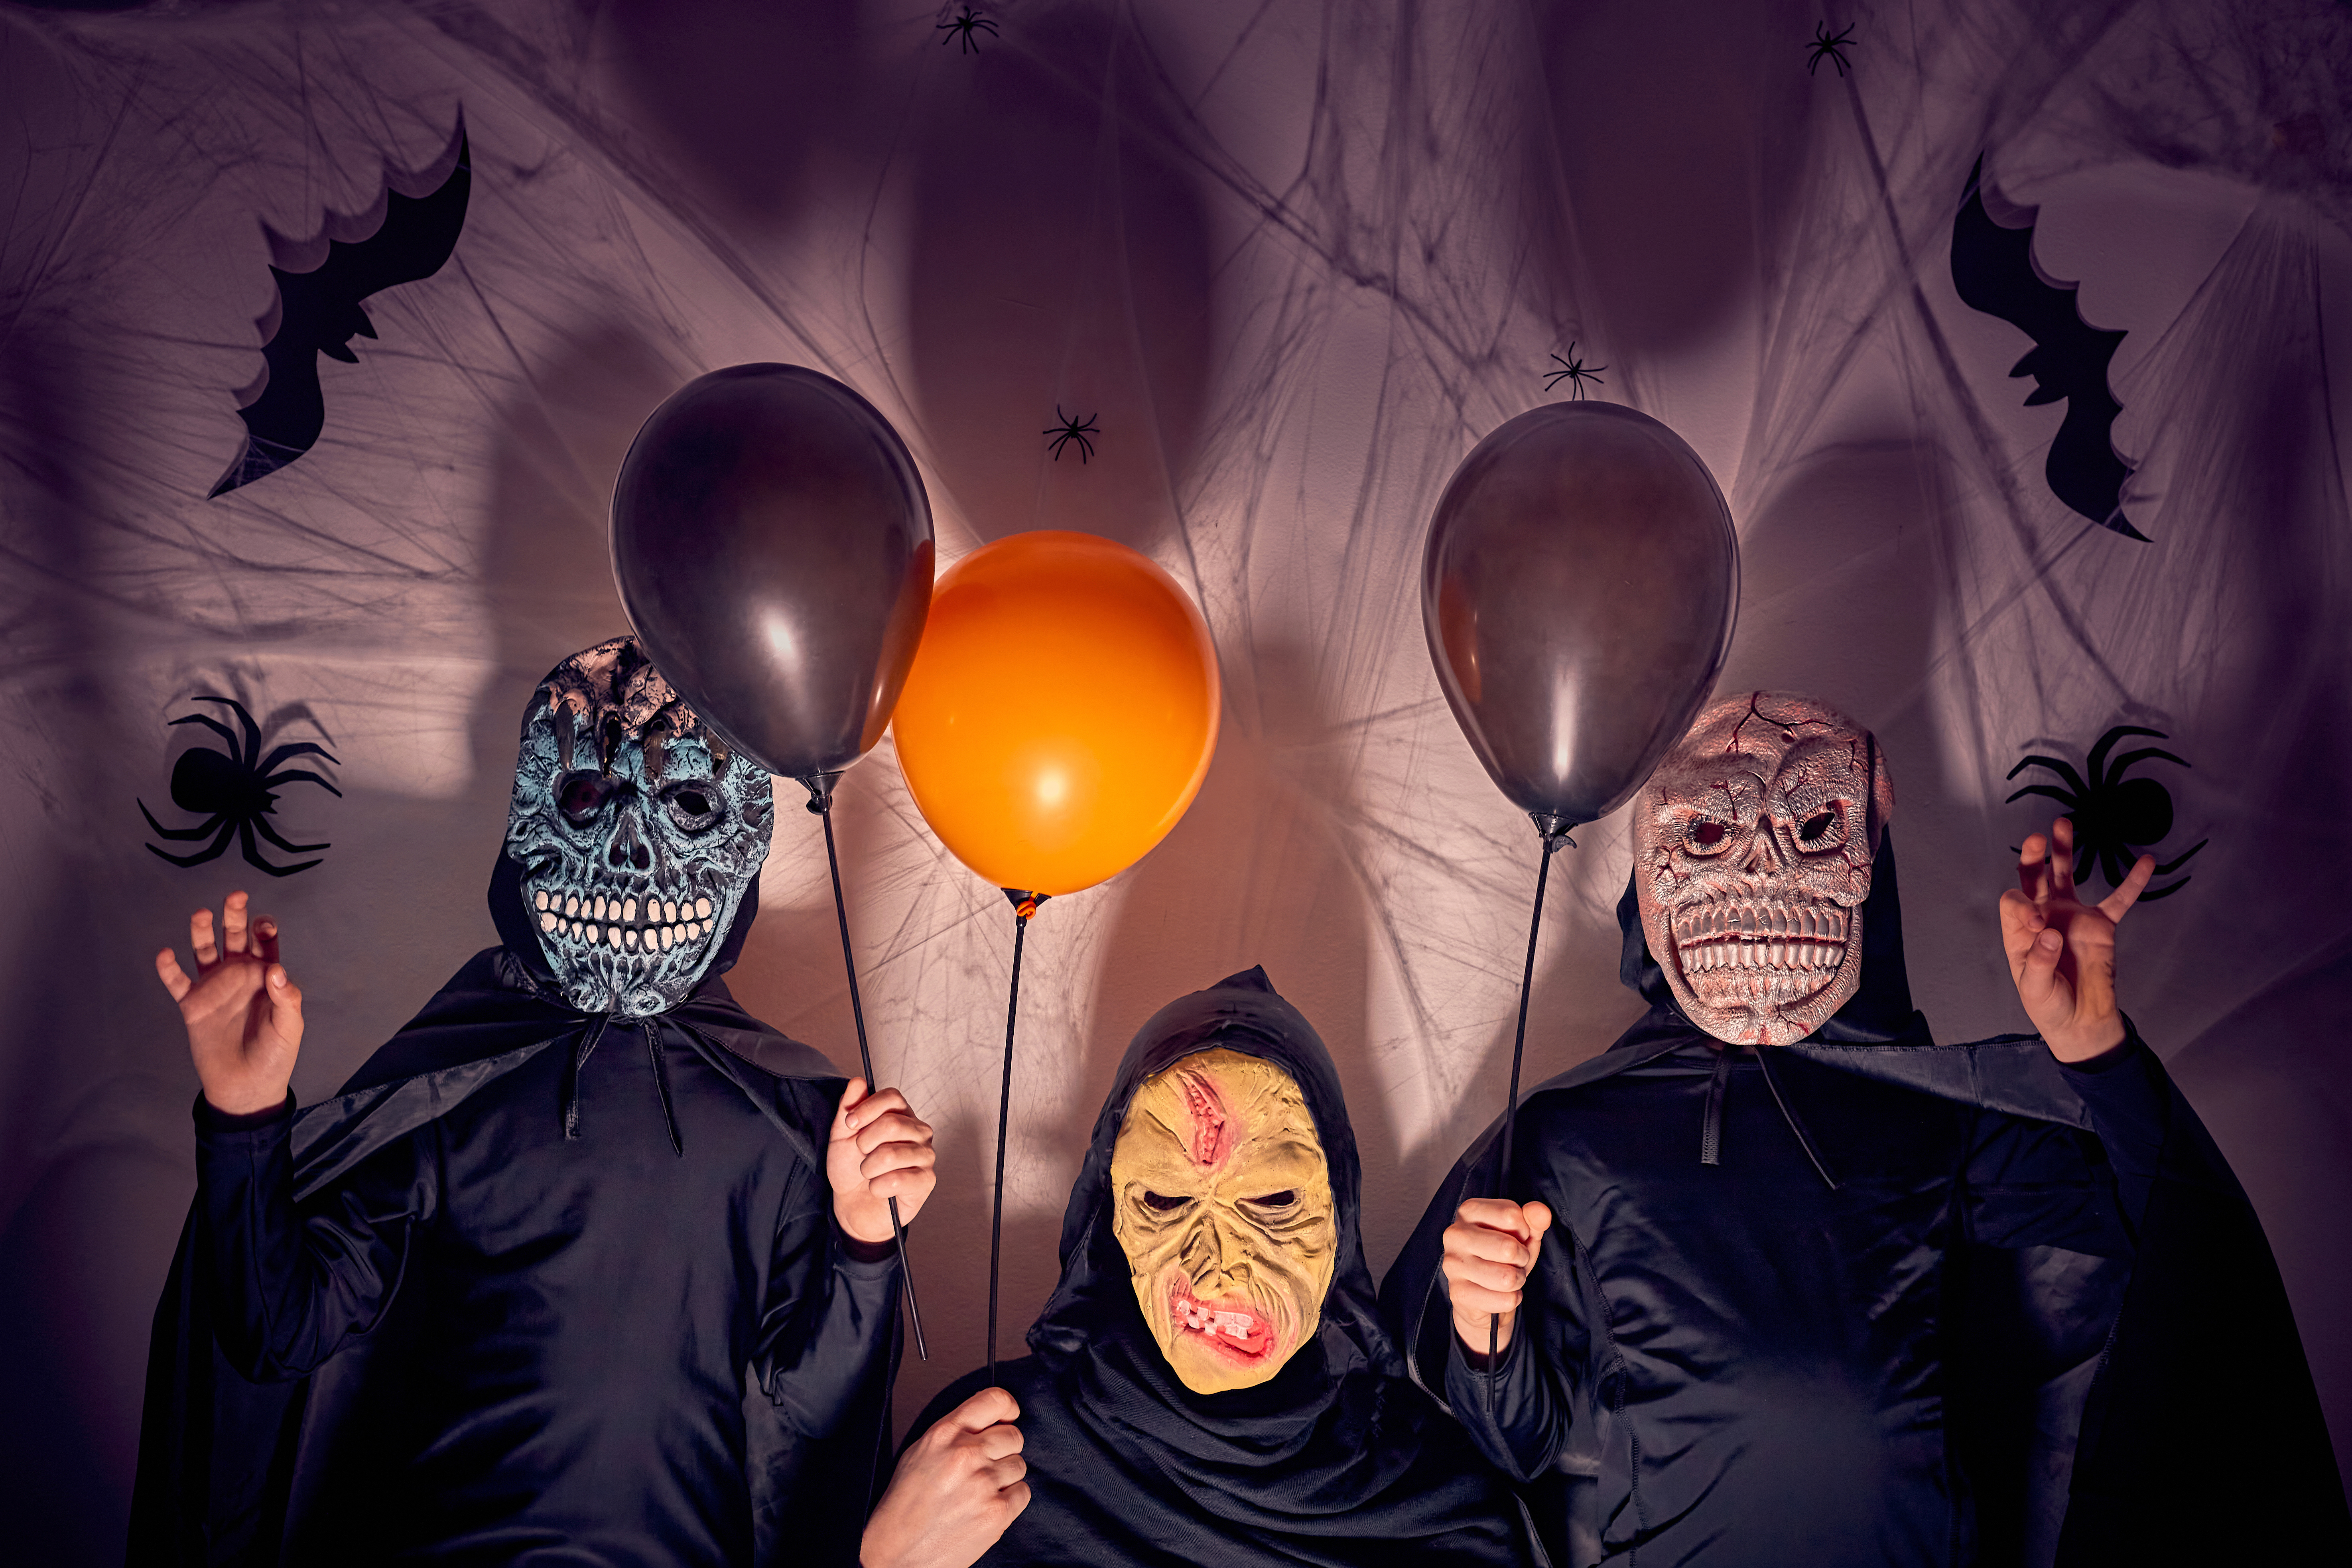 Two 7 years old boys with their mother in halloween costumes with masks as monsters and a witch holding black and orange balloons. Dark background with shadows, spiders, spiderwebs and bats.